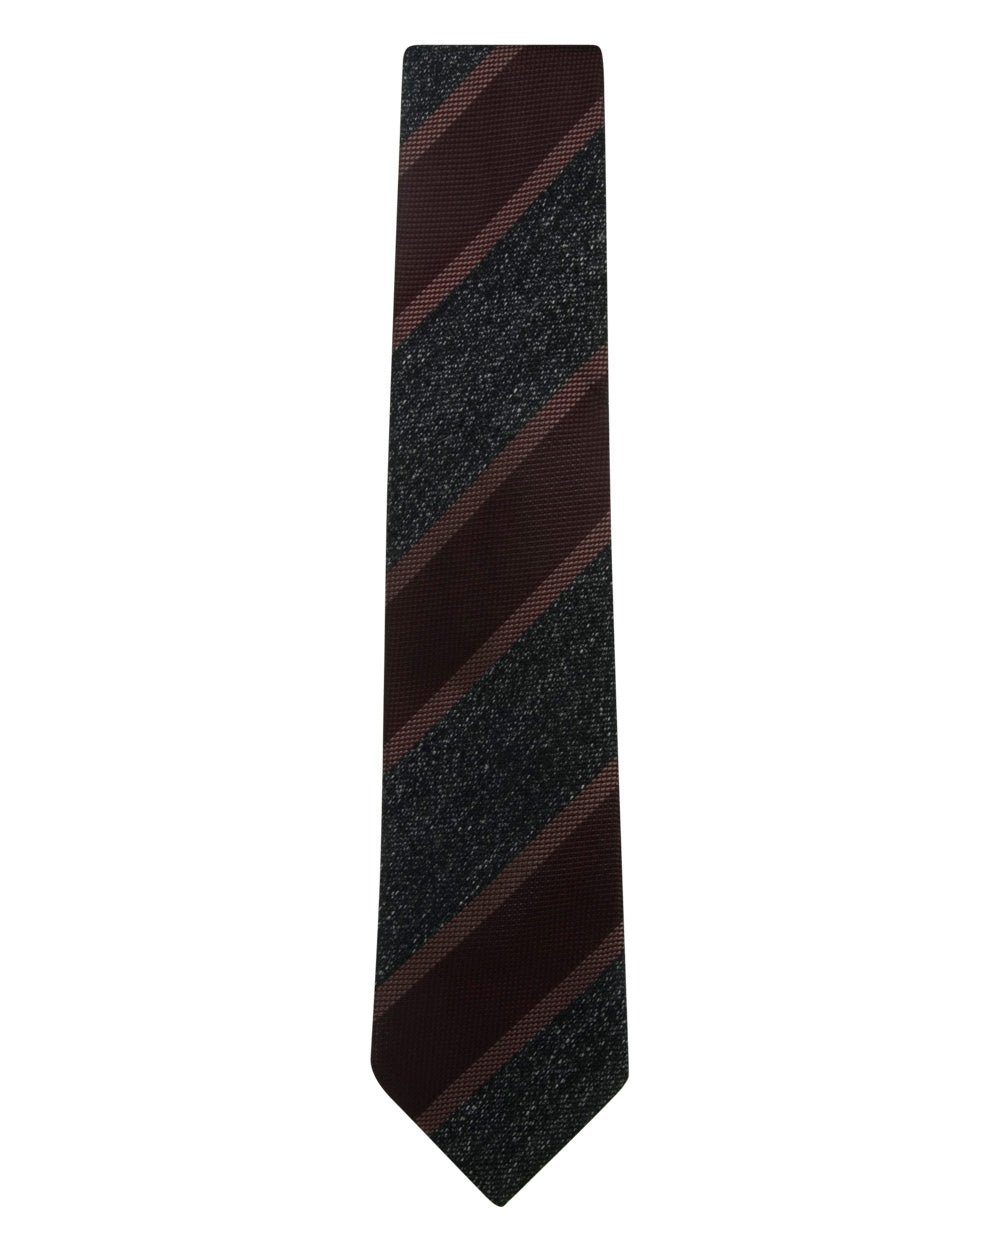 Charcoal and Wine Stripe Tie